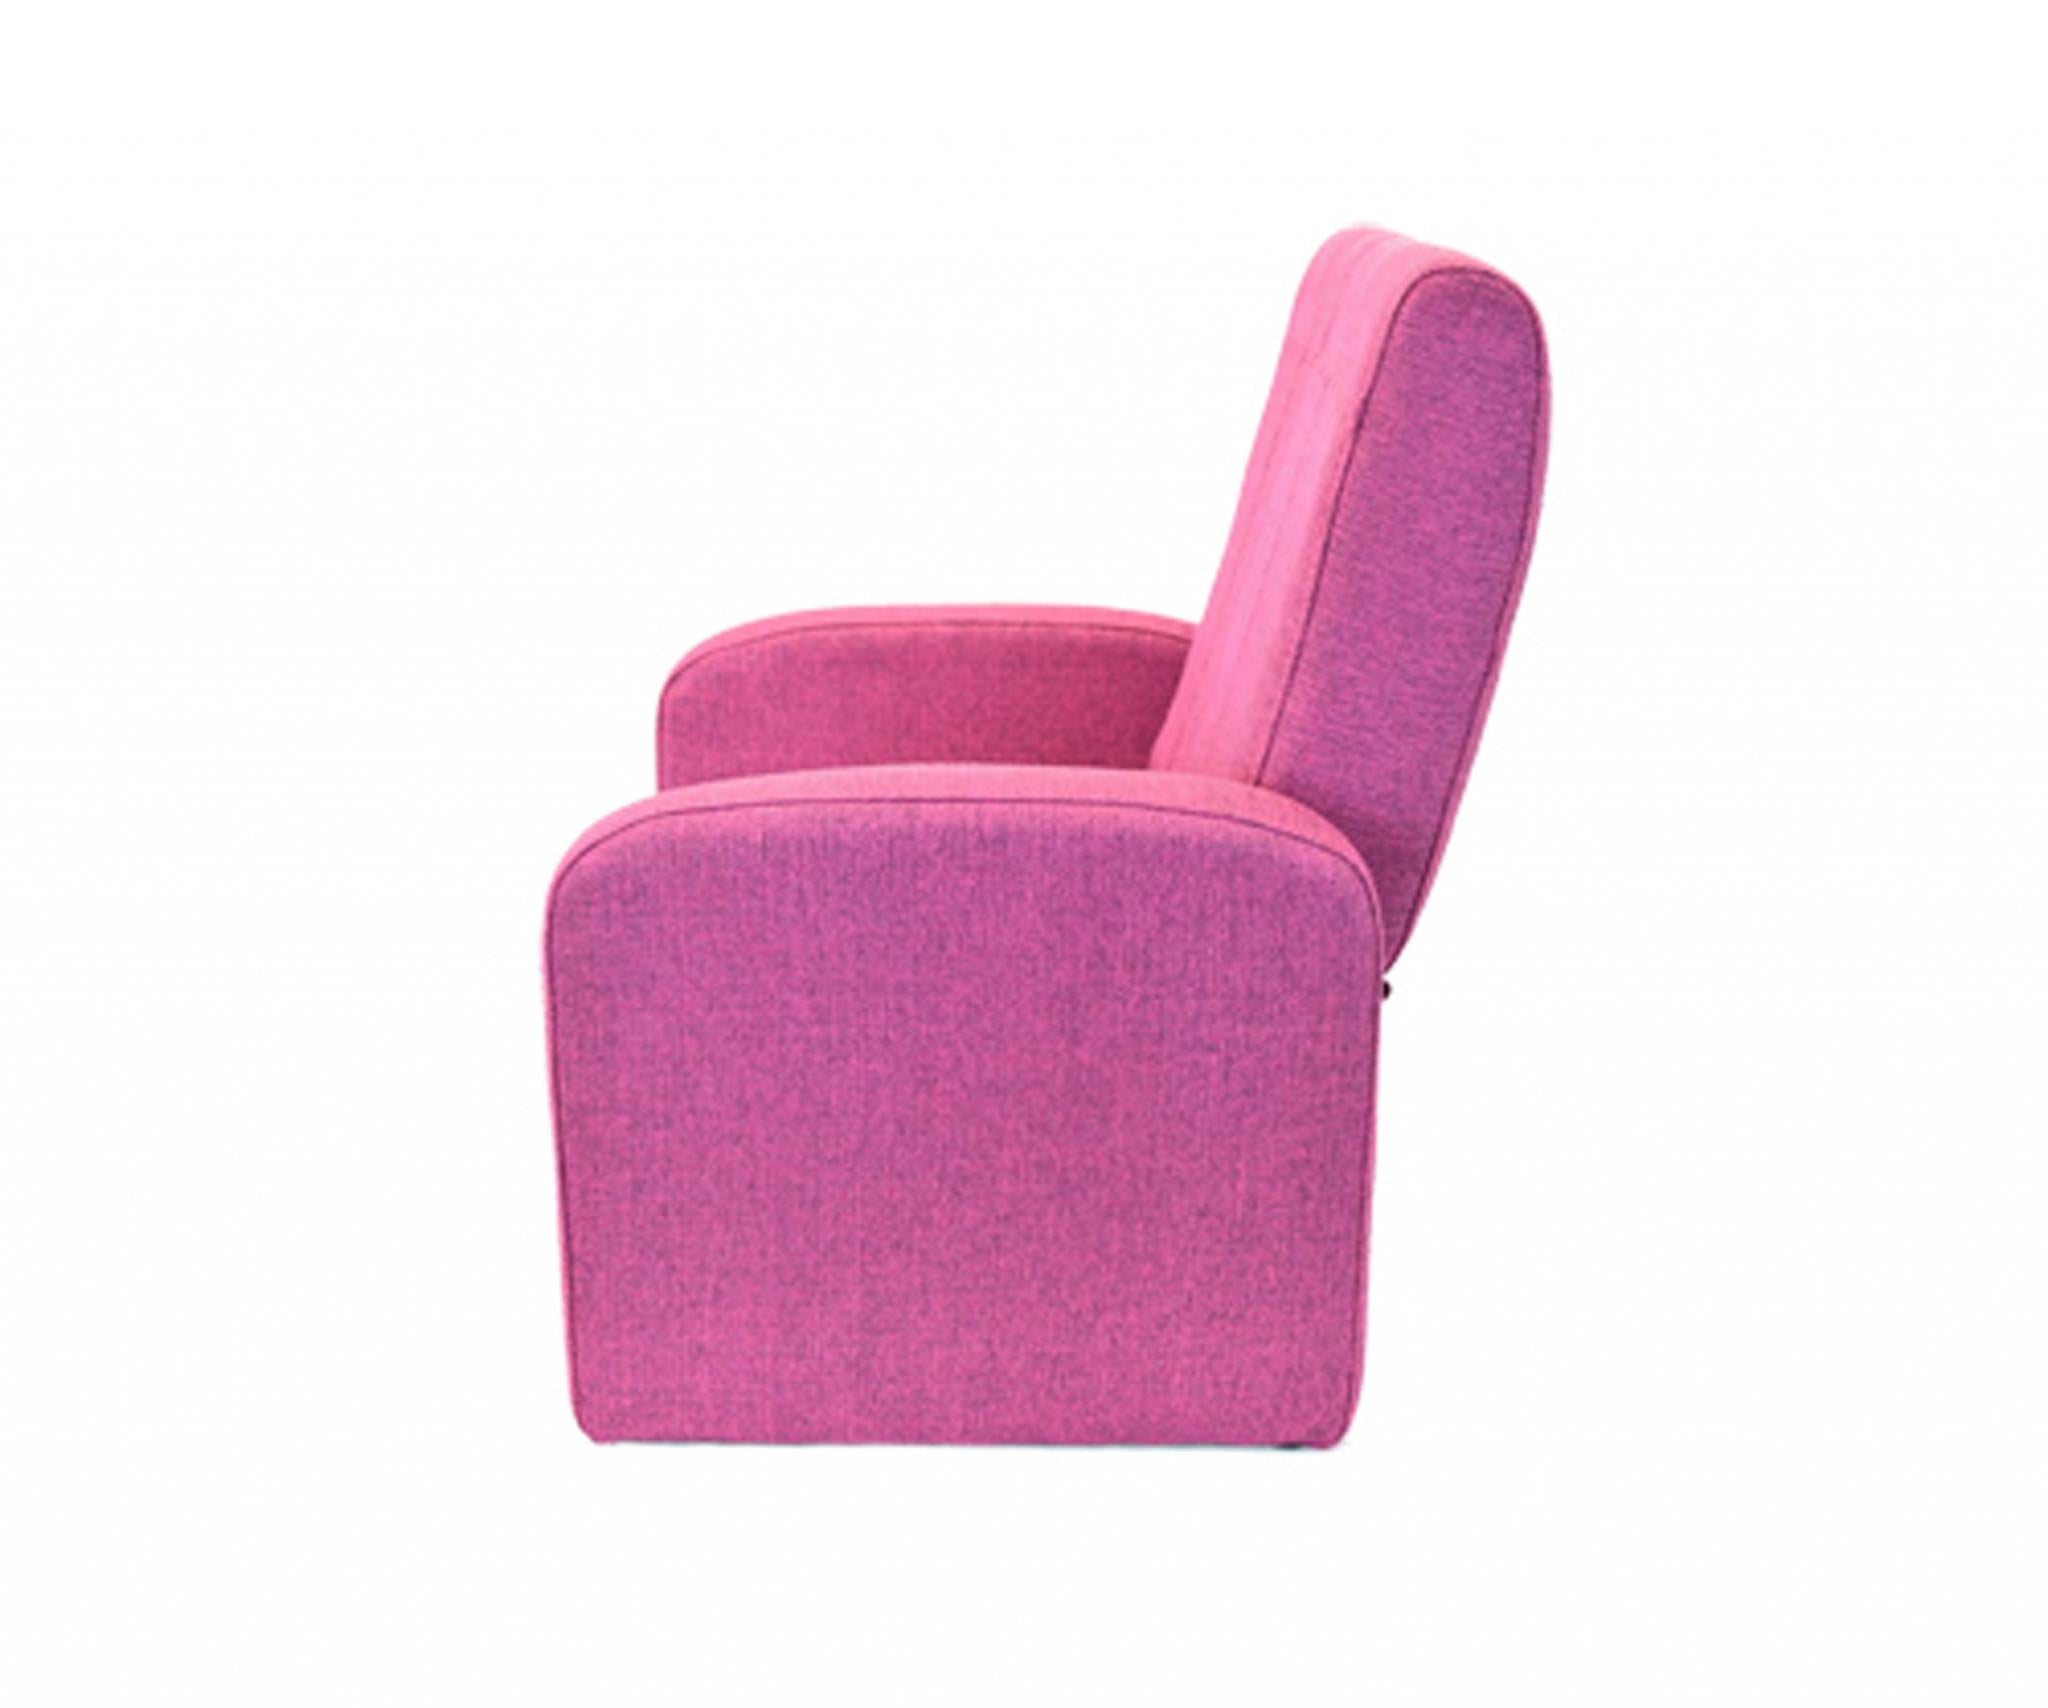 Kids Pink Comfy Upholstered Recliner Chair with Storage Default Title